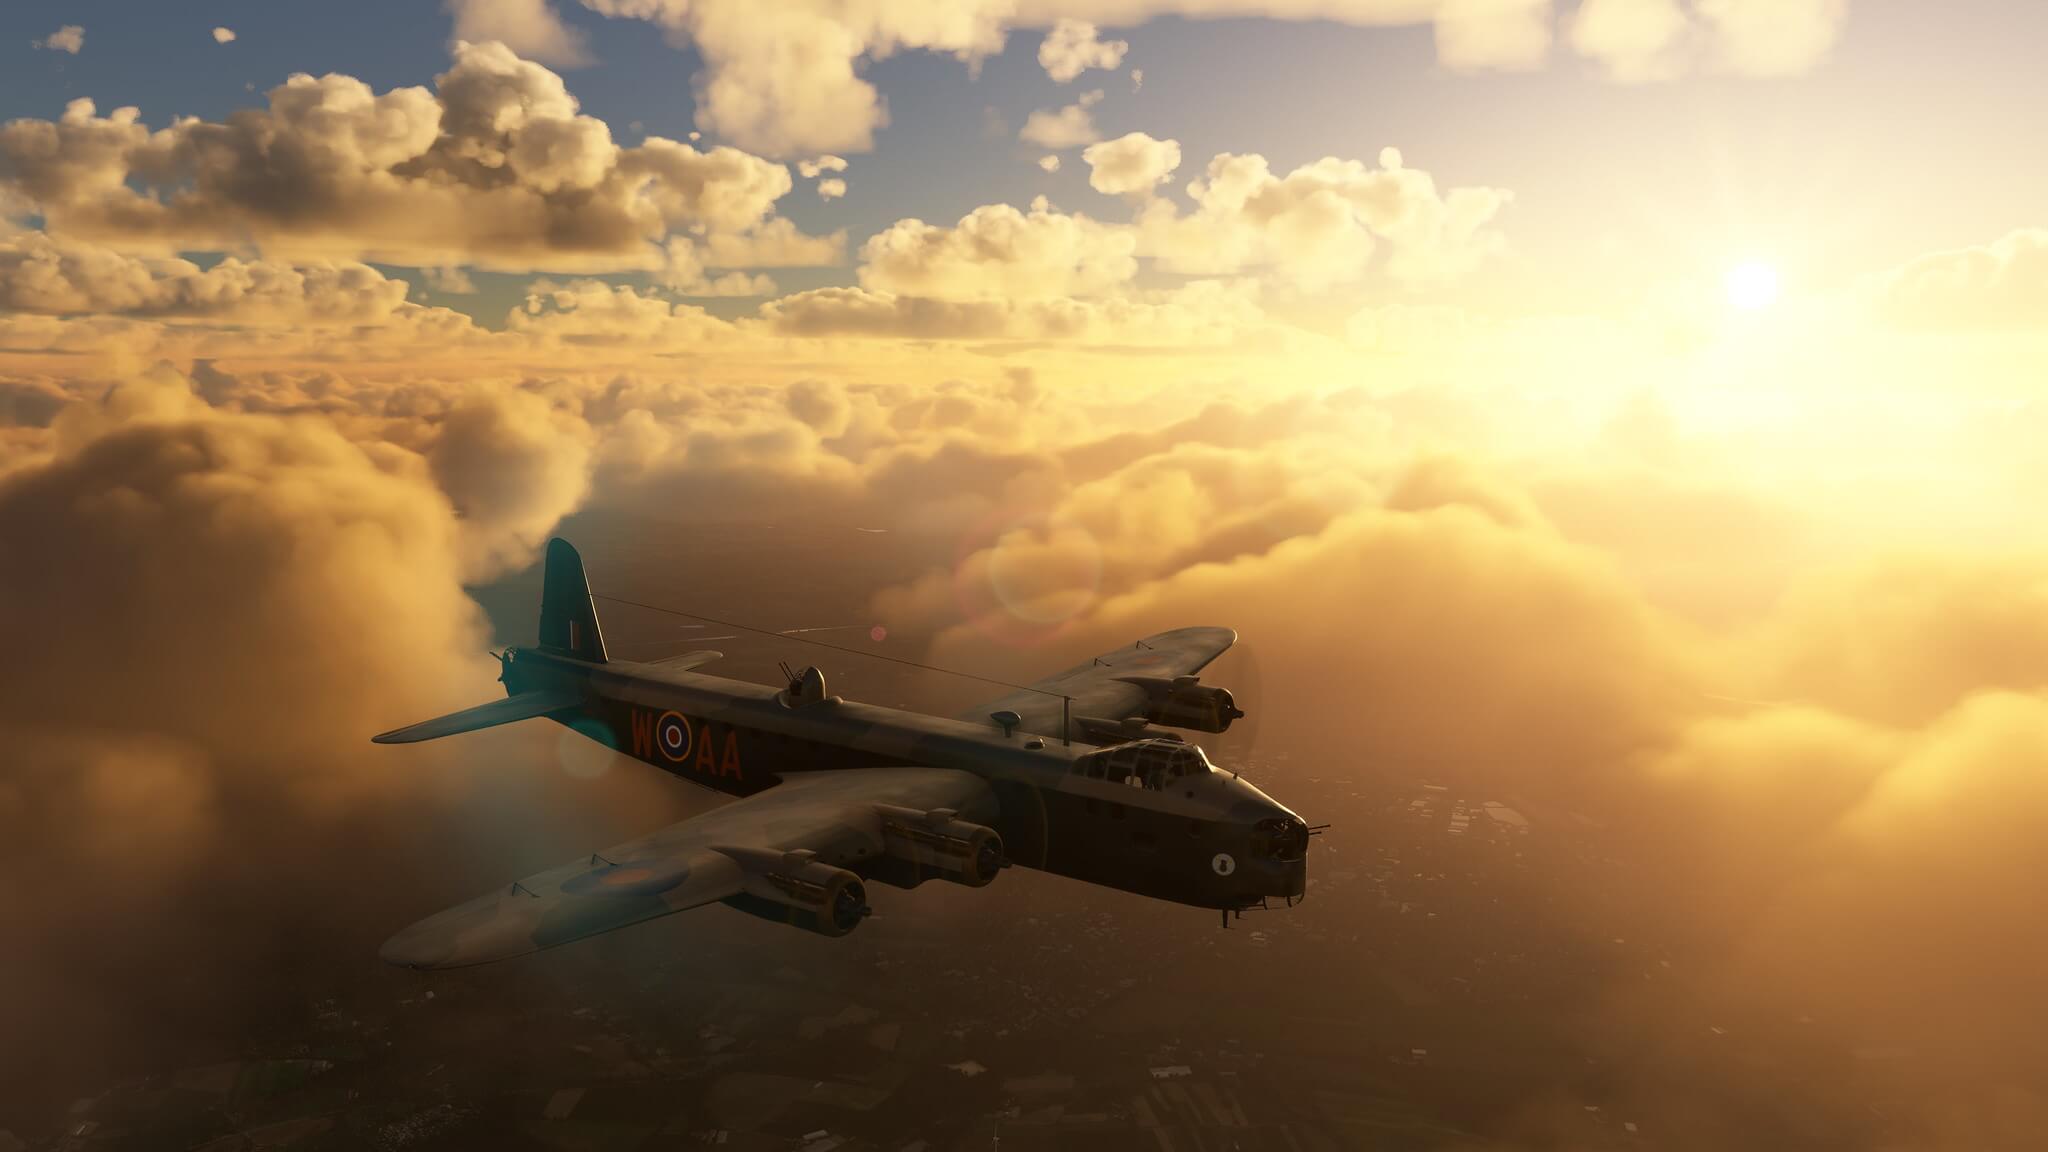 A Lancaster WW2 Bomber flies above clouds with the sun setting off to the left hand side.